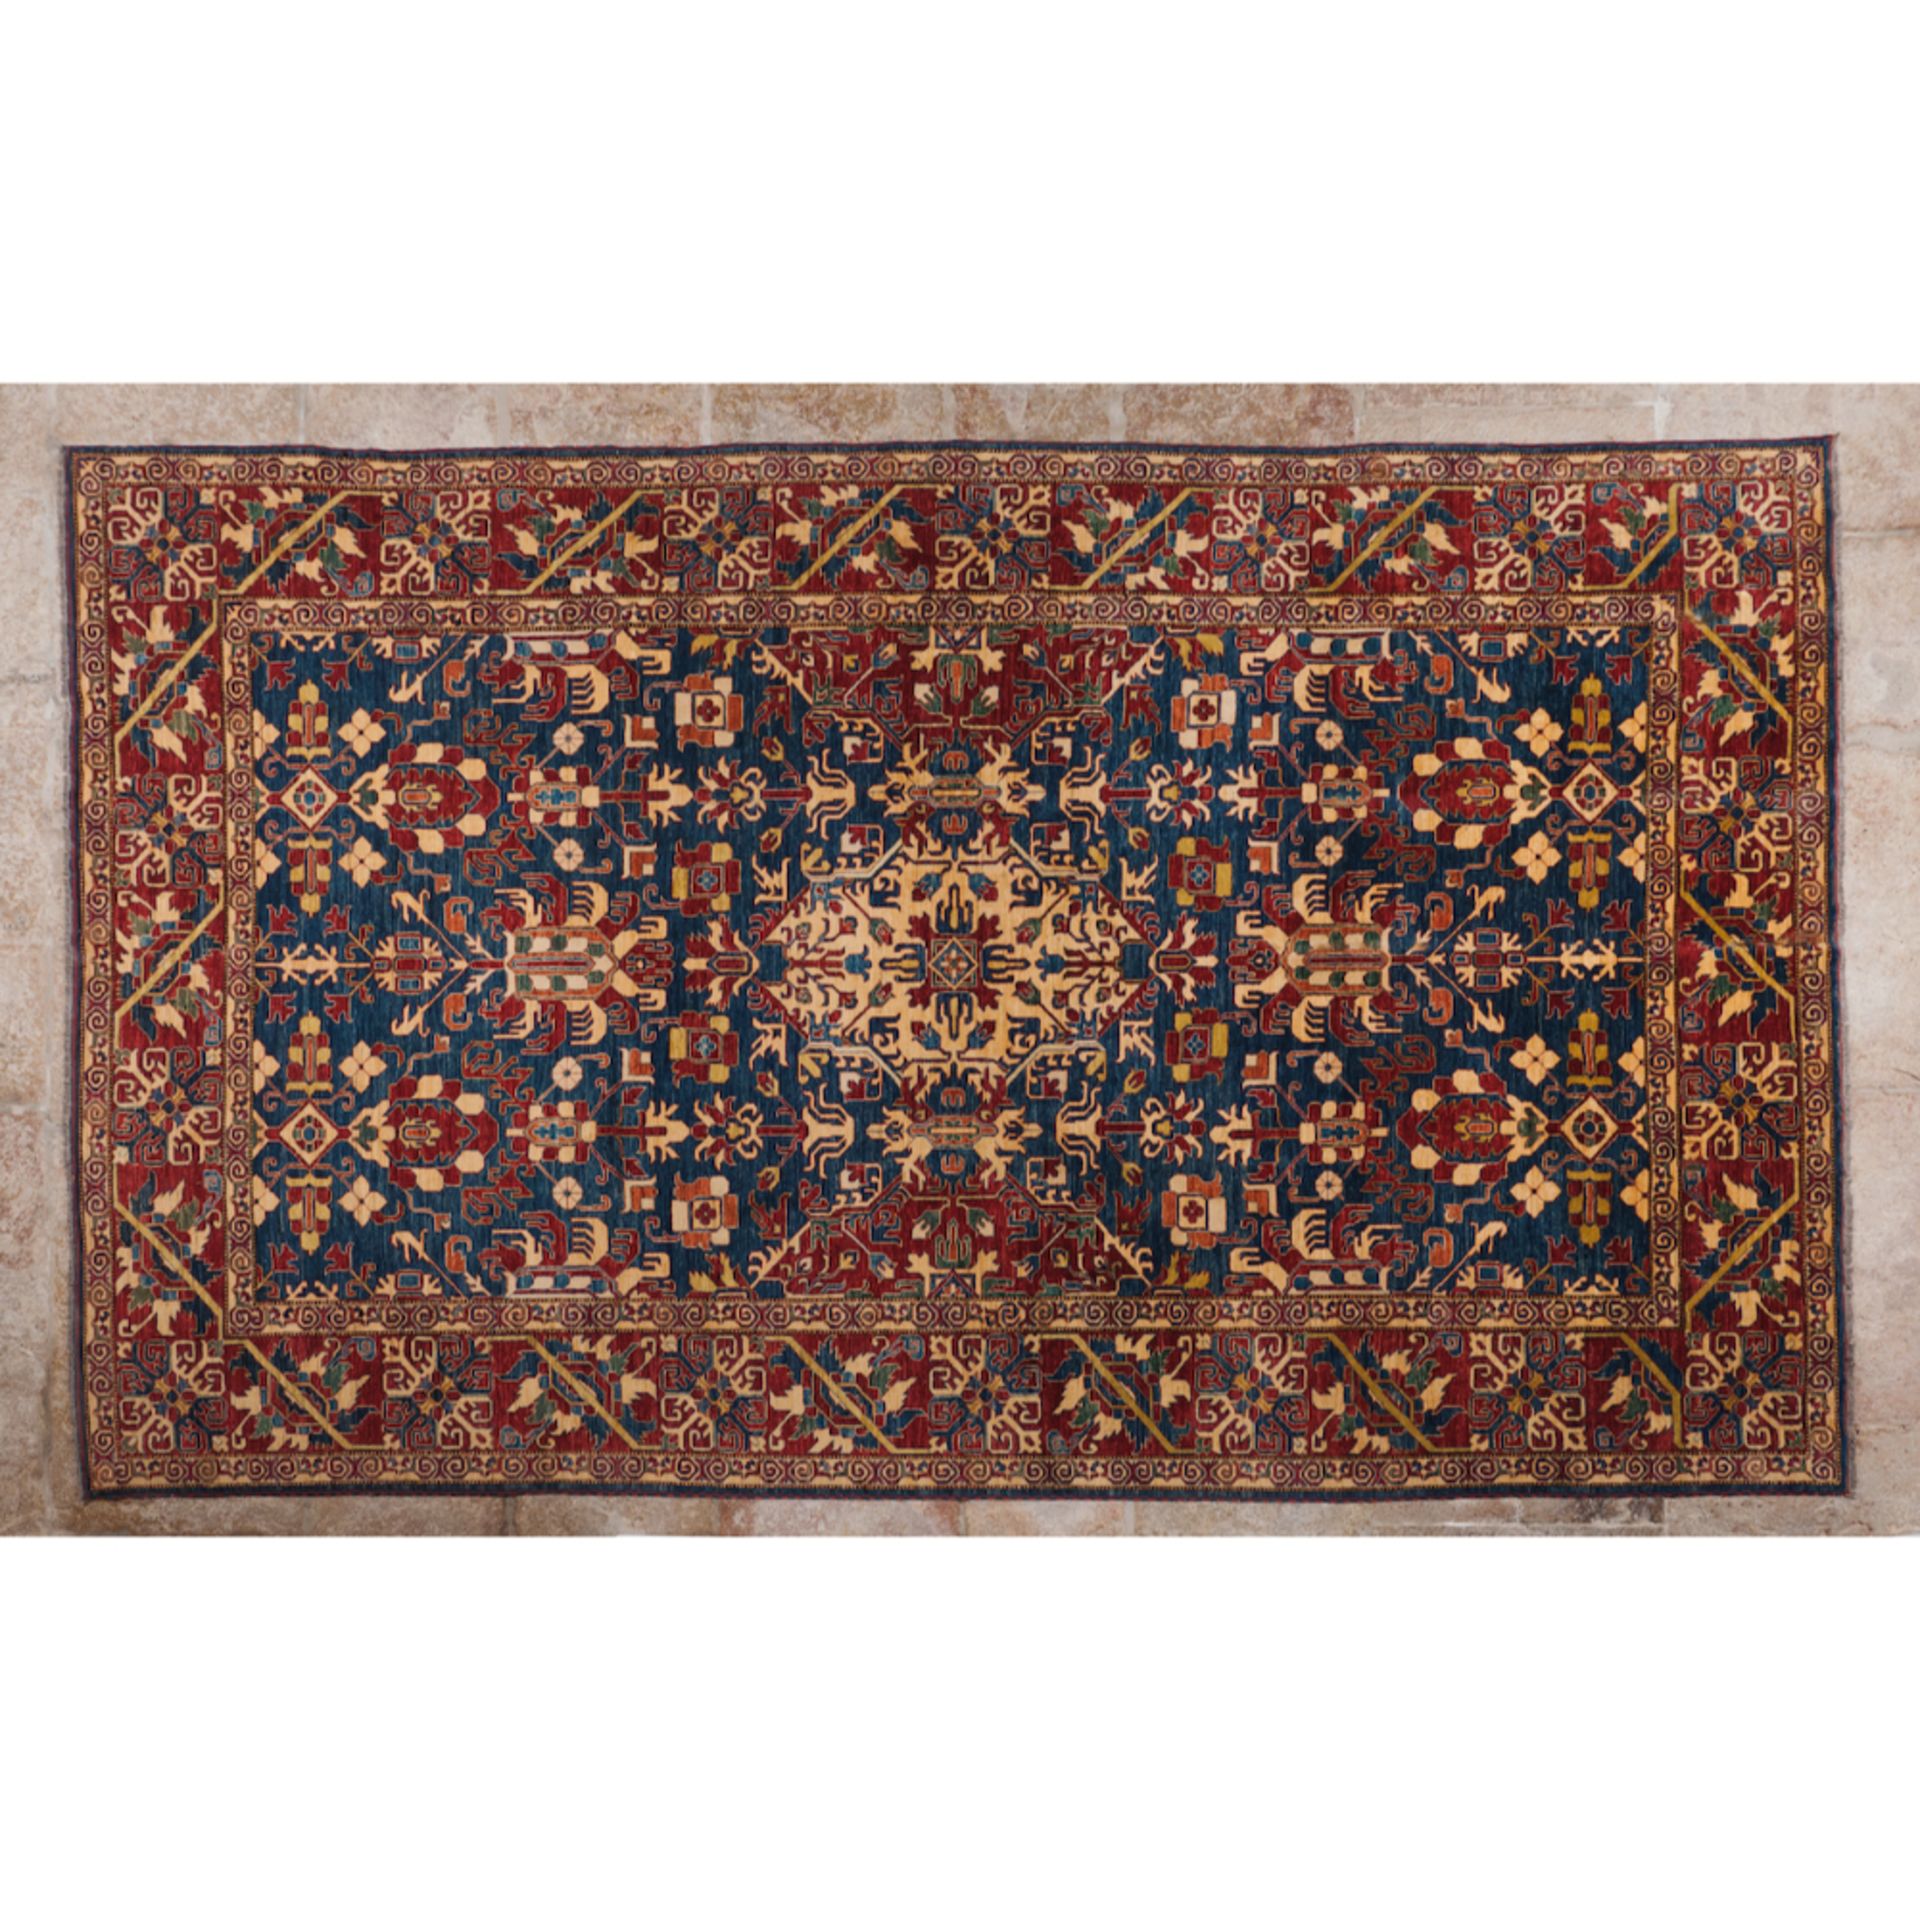 A Kazak rugIn wool and cotton Geometric and Floral design in burgundy, blue and beige 475x330 cm